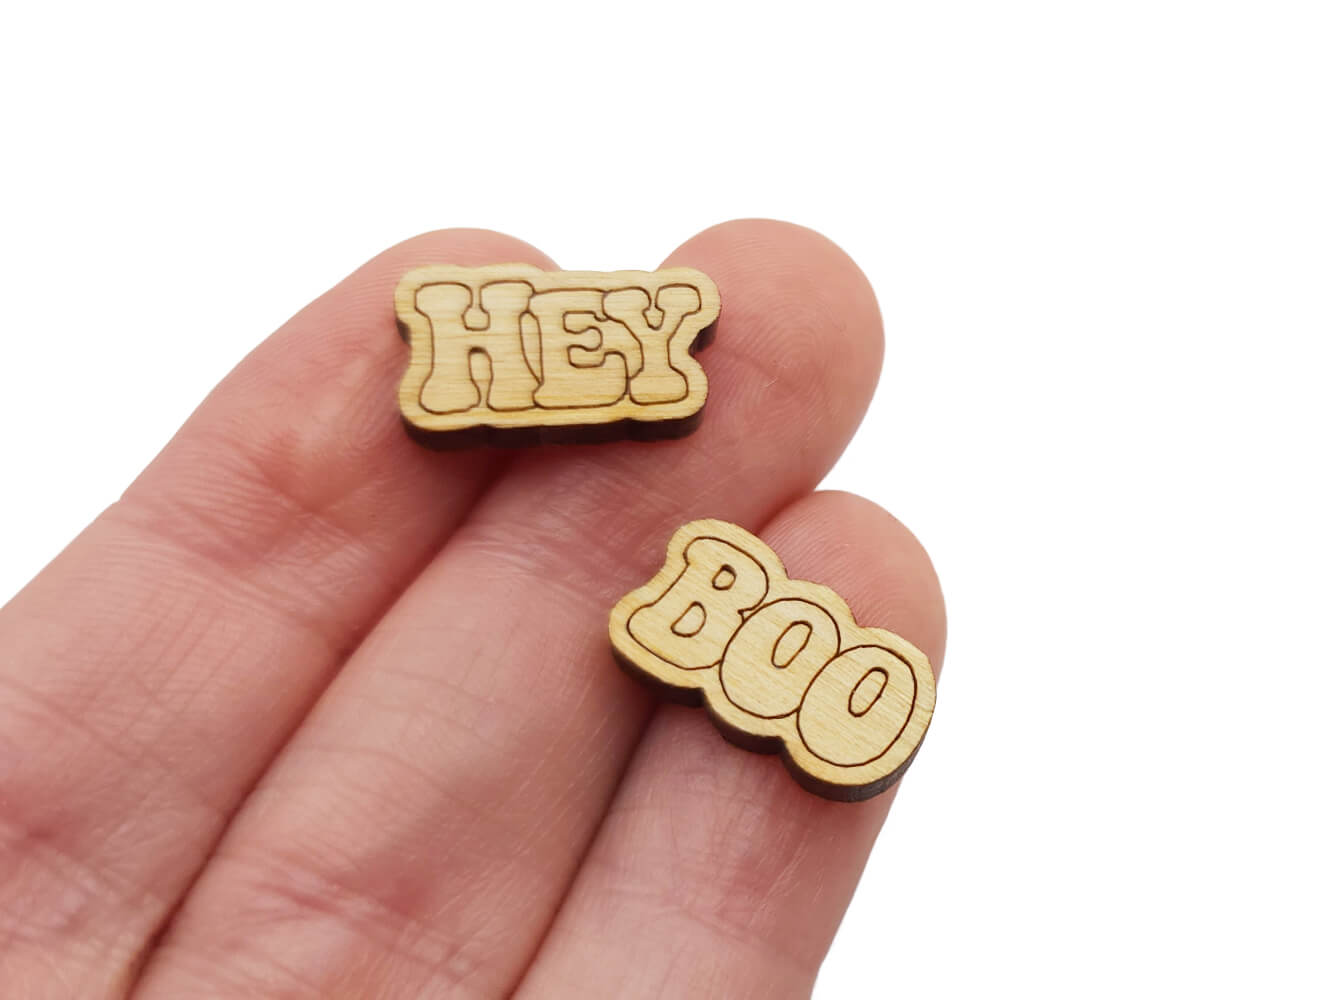 Hey Boo Engraved Wood Cabochon Stud Earring Blanks